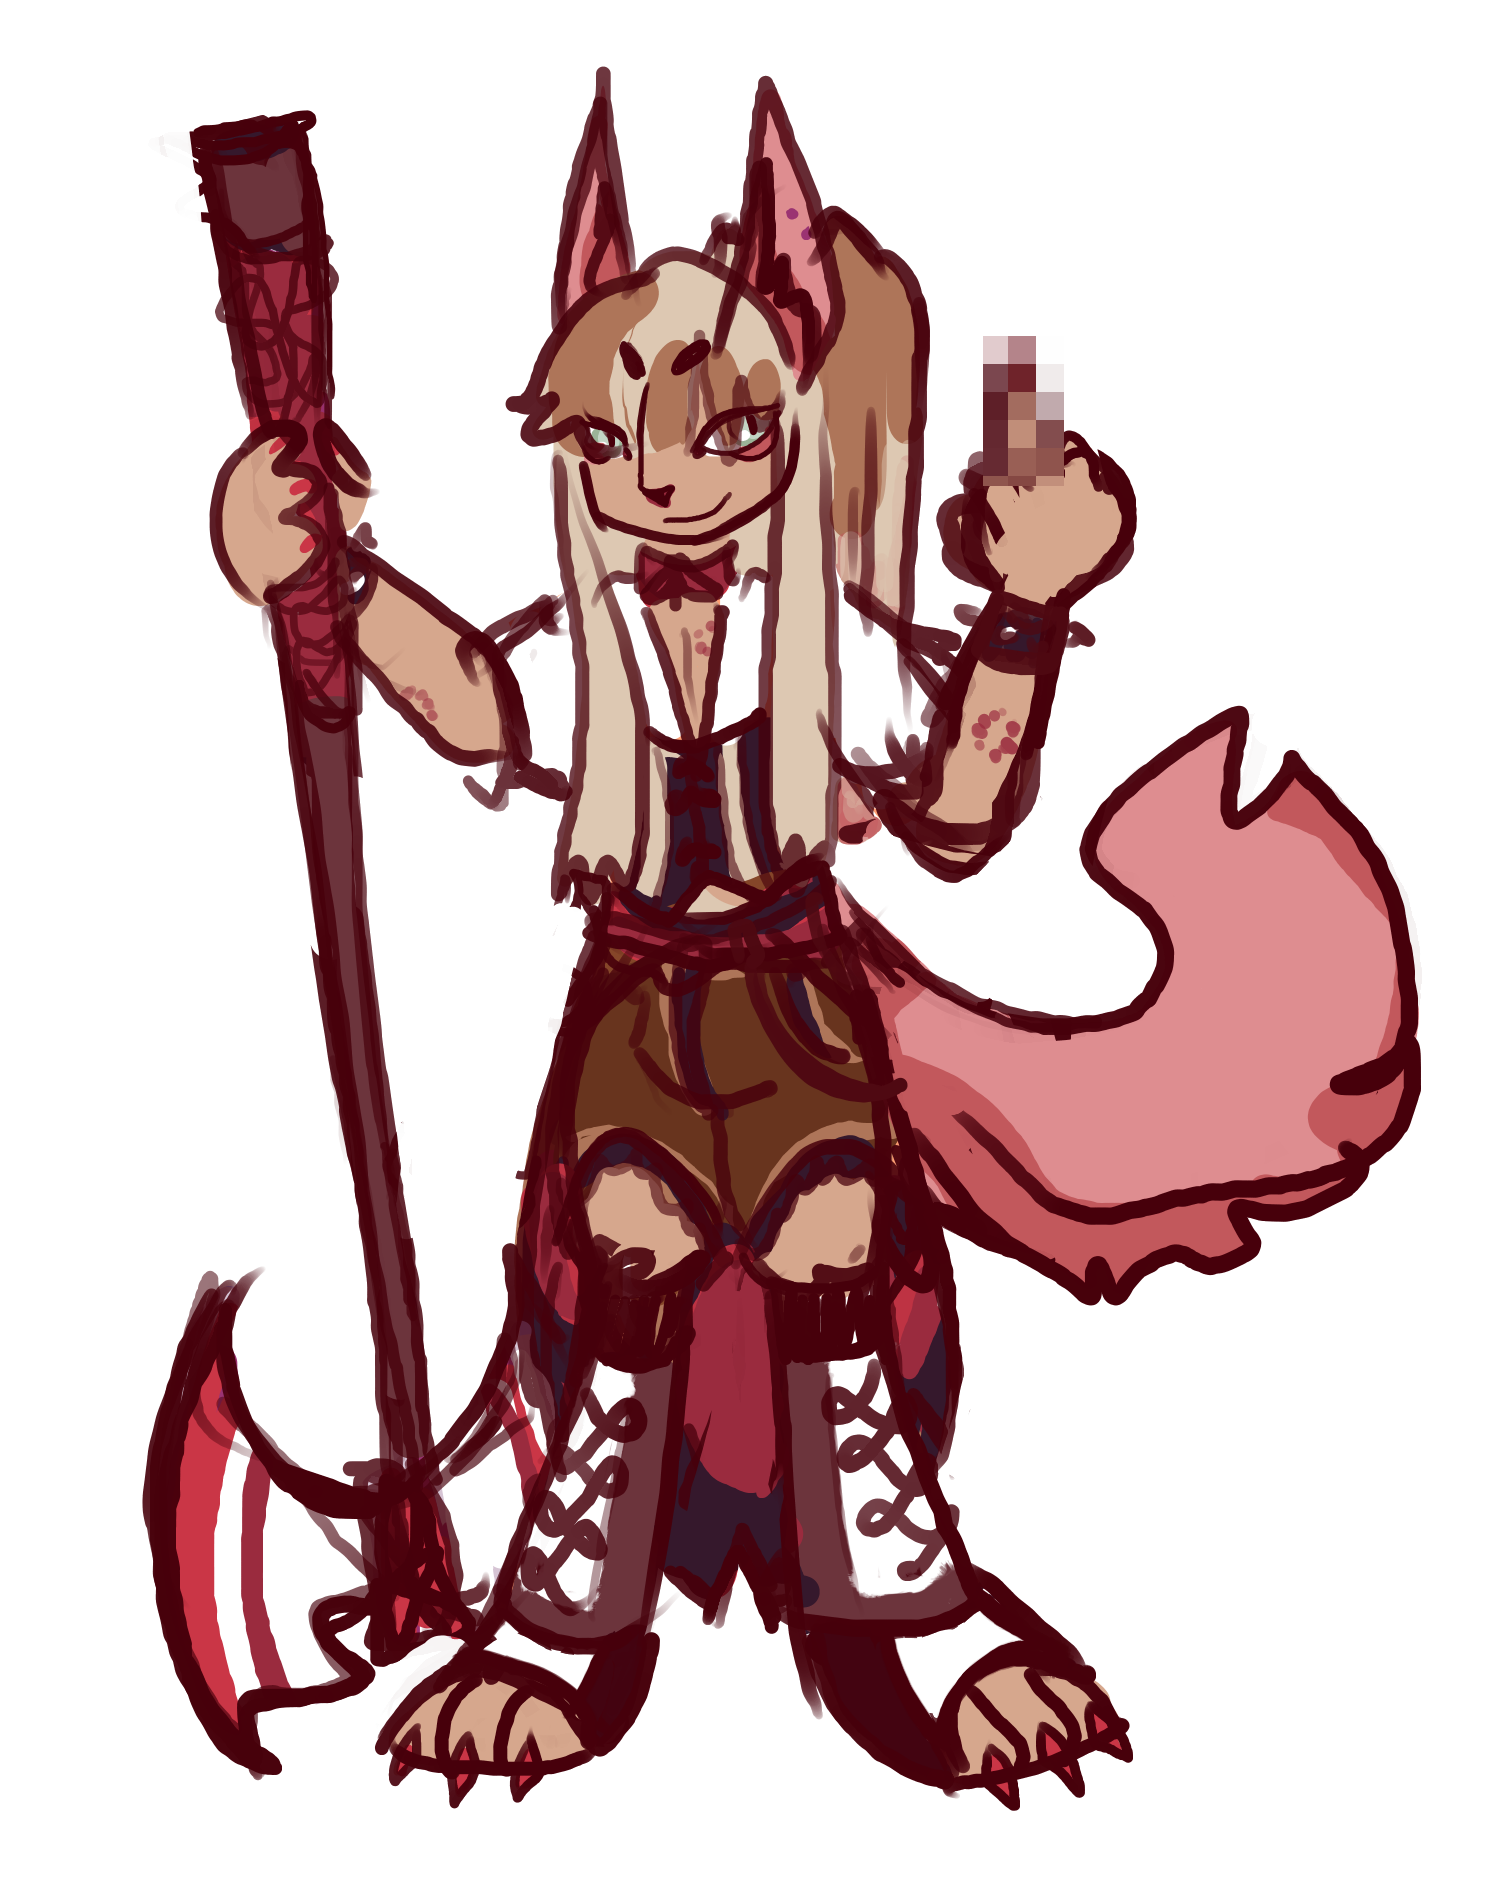  A kistune warrior whose barbaric fighting styles are enhanced by blood and bloodlust